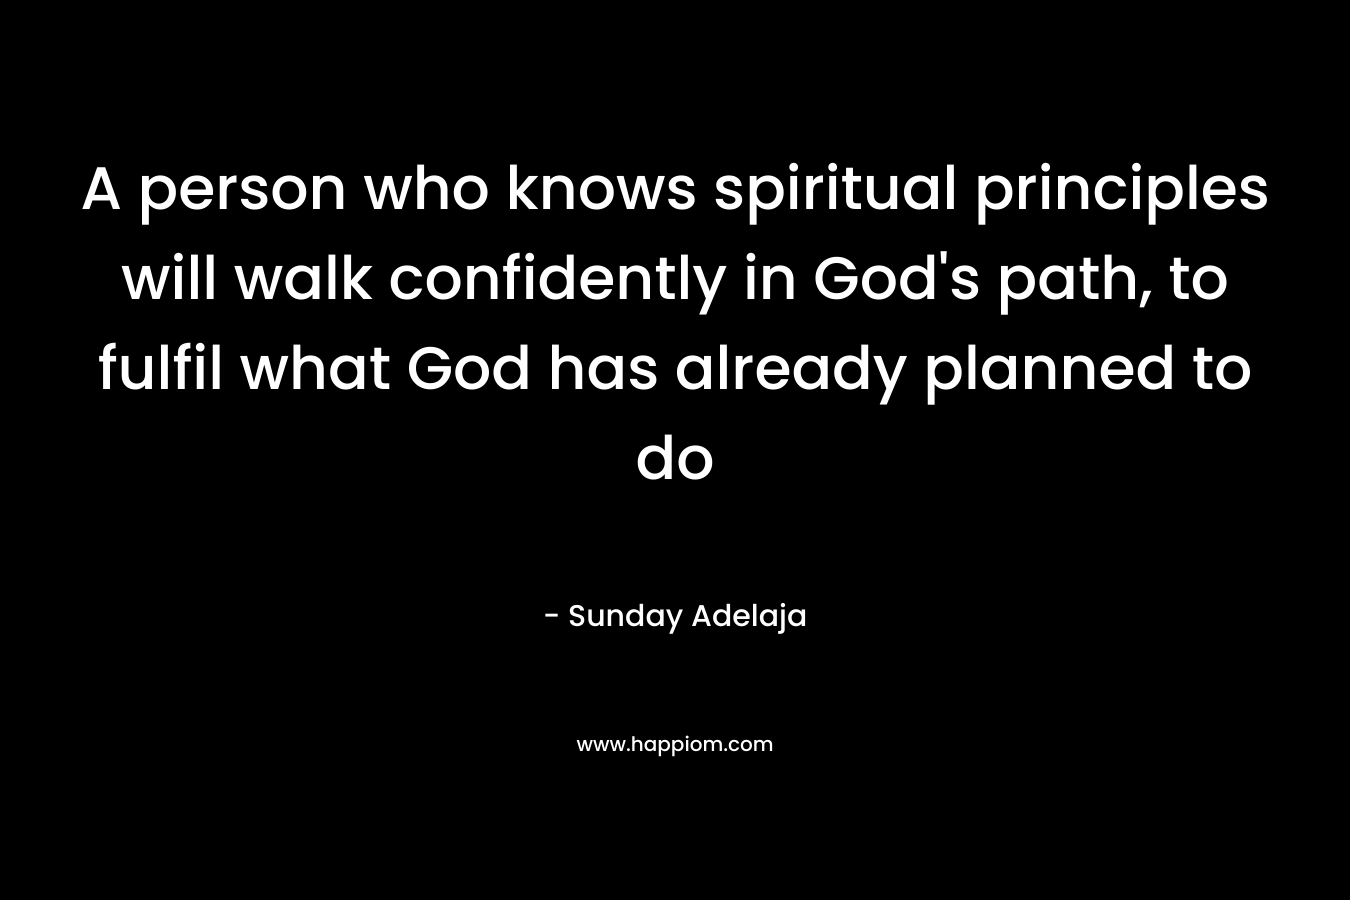 A person who knows spiritual principles will walk confidently in God's path, to fulfil what God has already planned to do